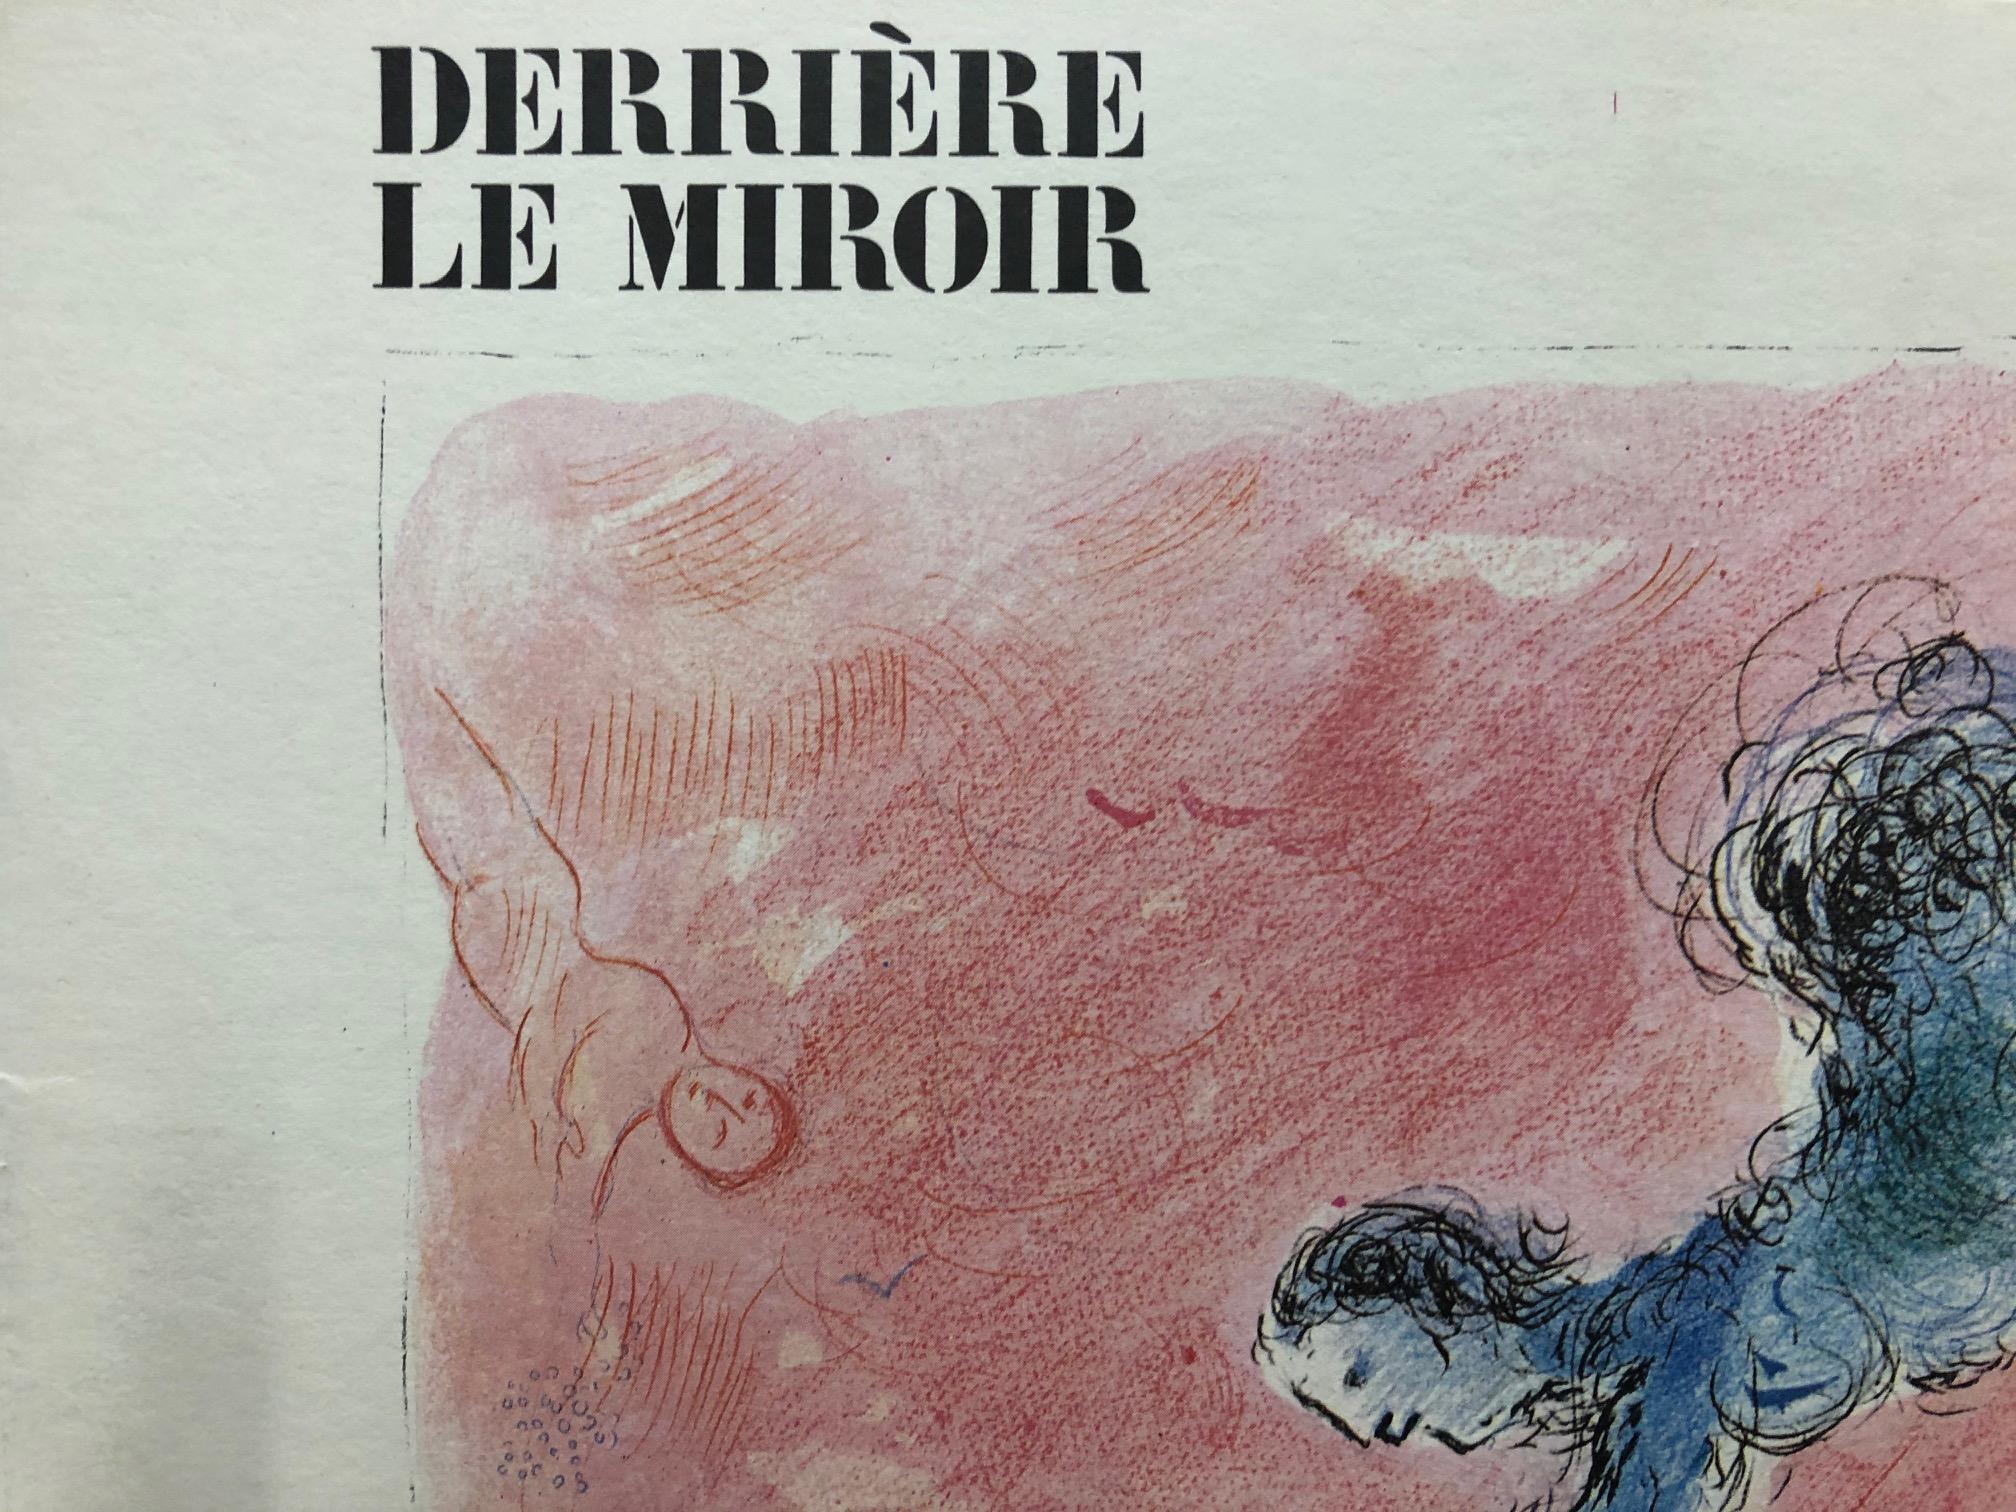 Full Booklet-Lithographies originales: Derrière le miroir. Galerie Maeght.  - Print by (after) Marc Chagall